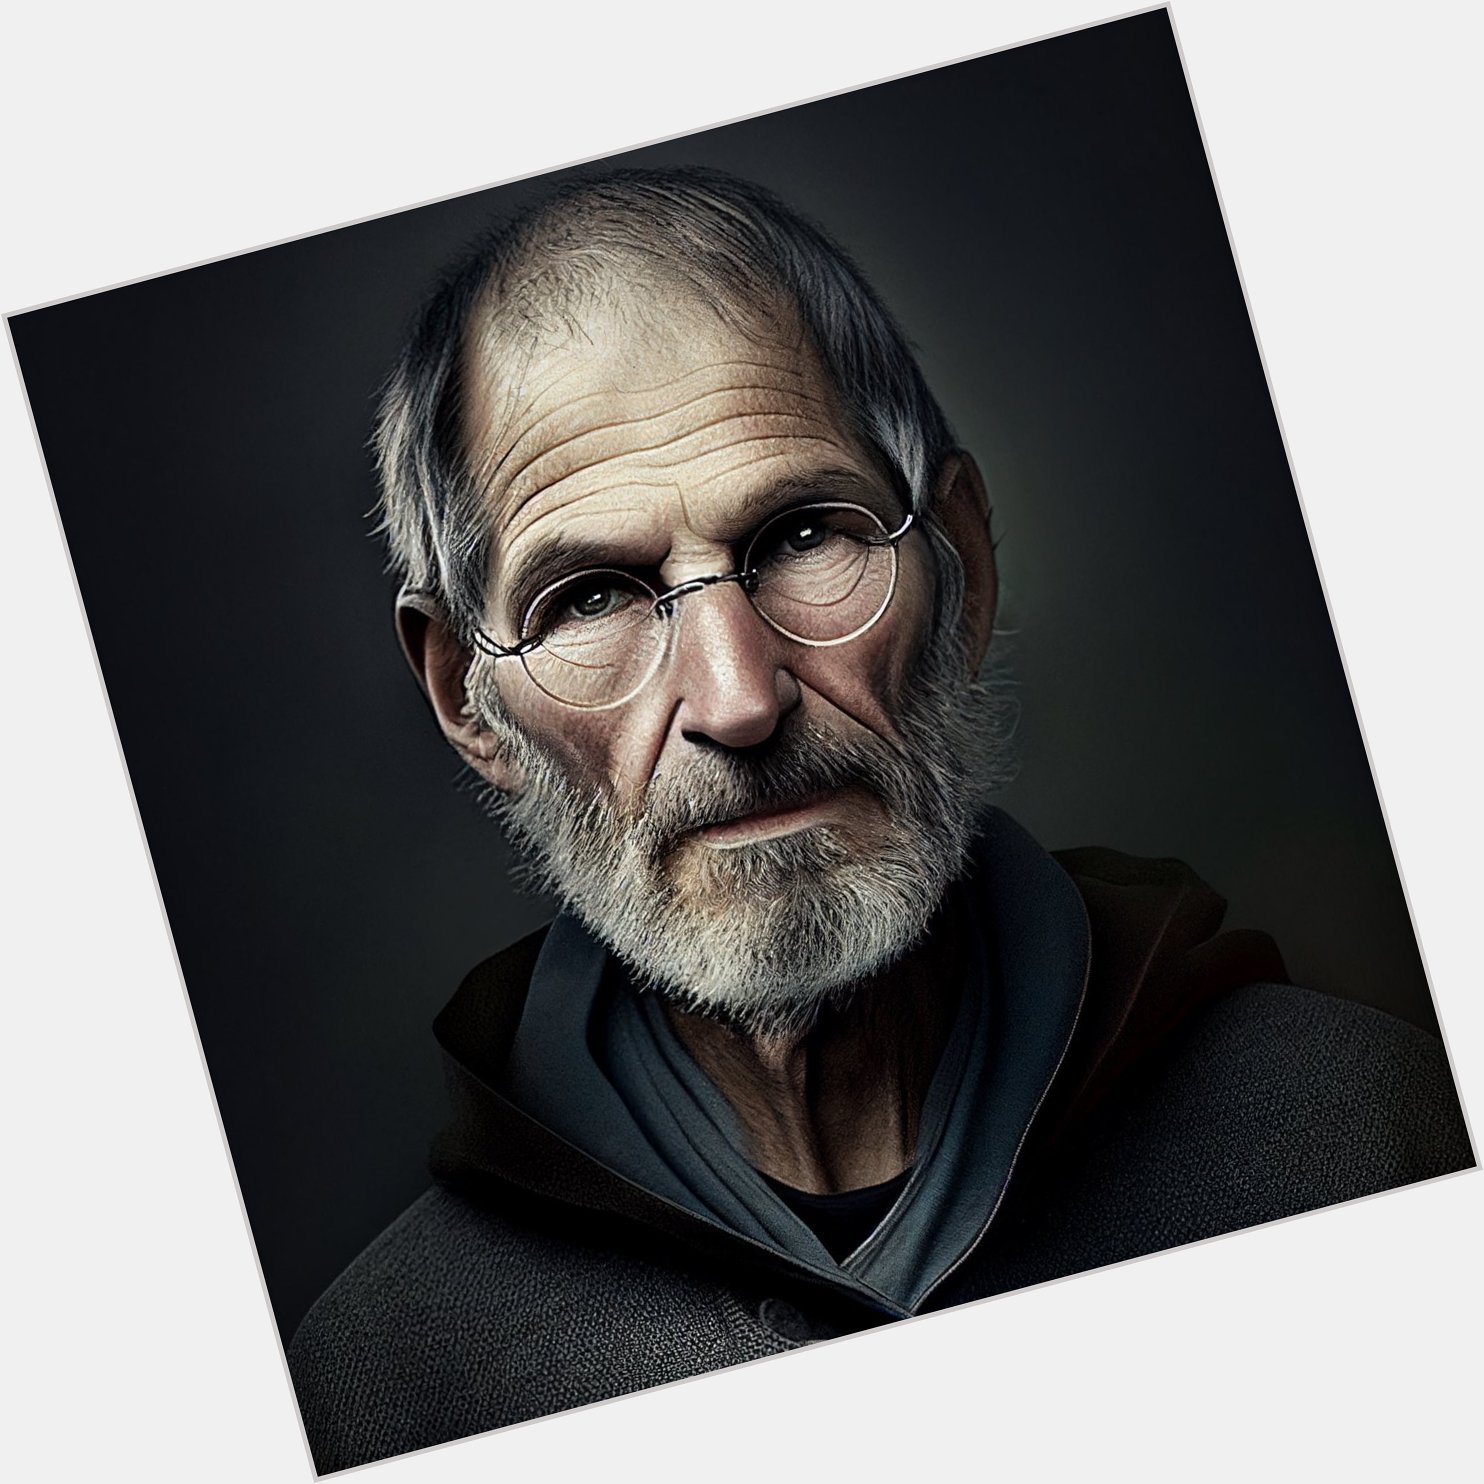 Steve Jobs | Born: February 24, 1955
Happy Birthday! He would turn 68 today.

Here s how he might ve looked today: 